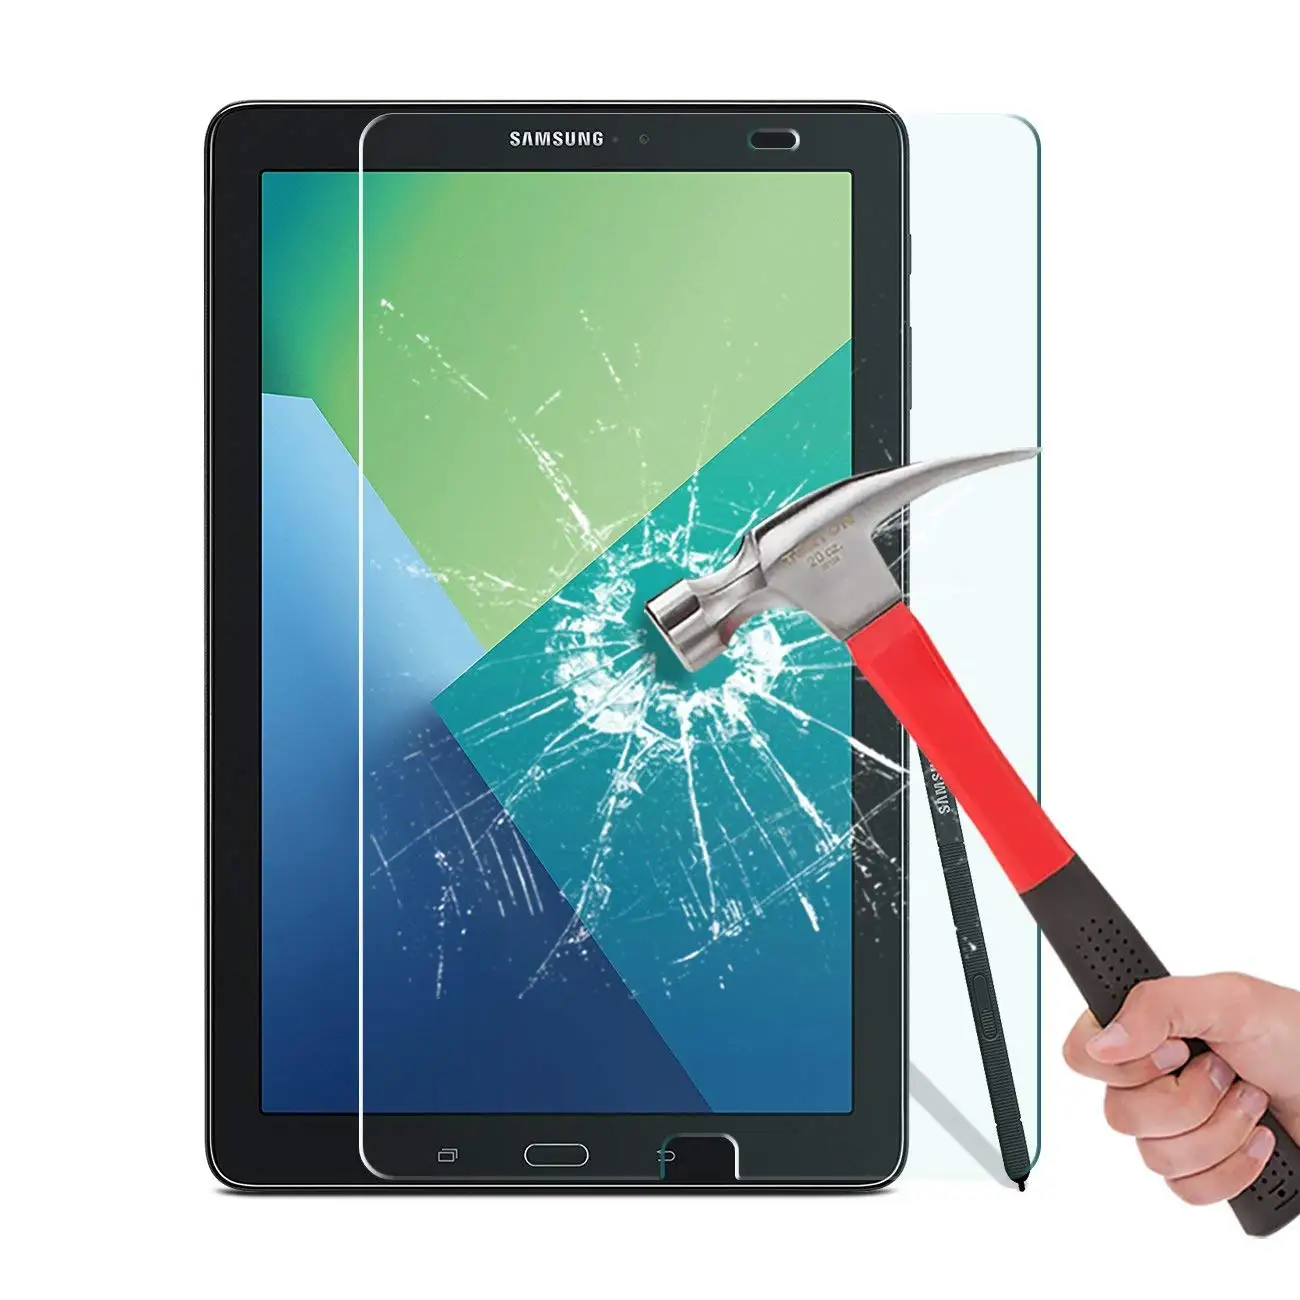 

Tempered Glass Screen Protector Film for Samsung Galaxy Tab 4 3 2 8.0 T330 10.1 T530 7.0 T230 P5200 T310 T210 P5100 Lite T110